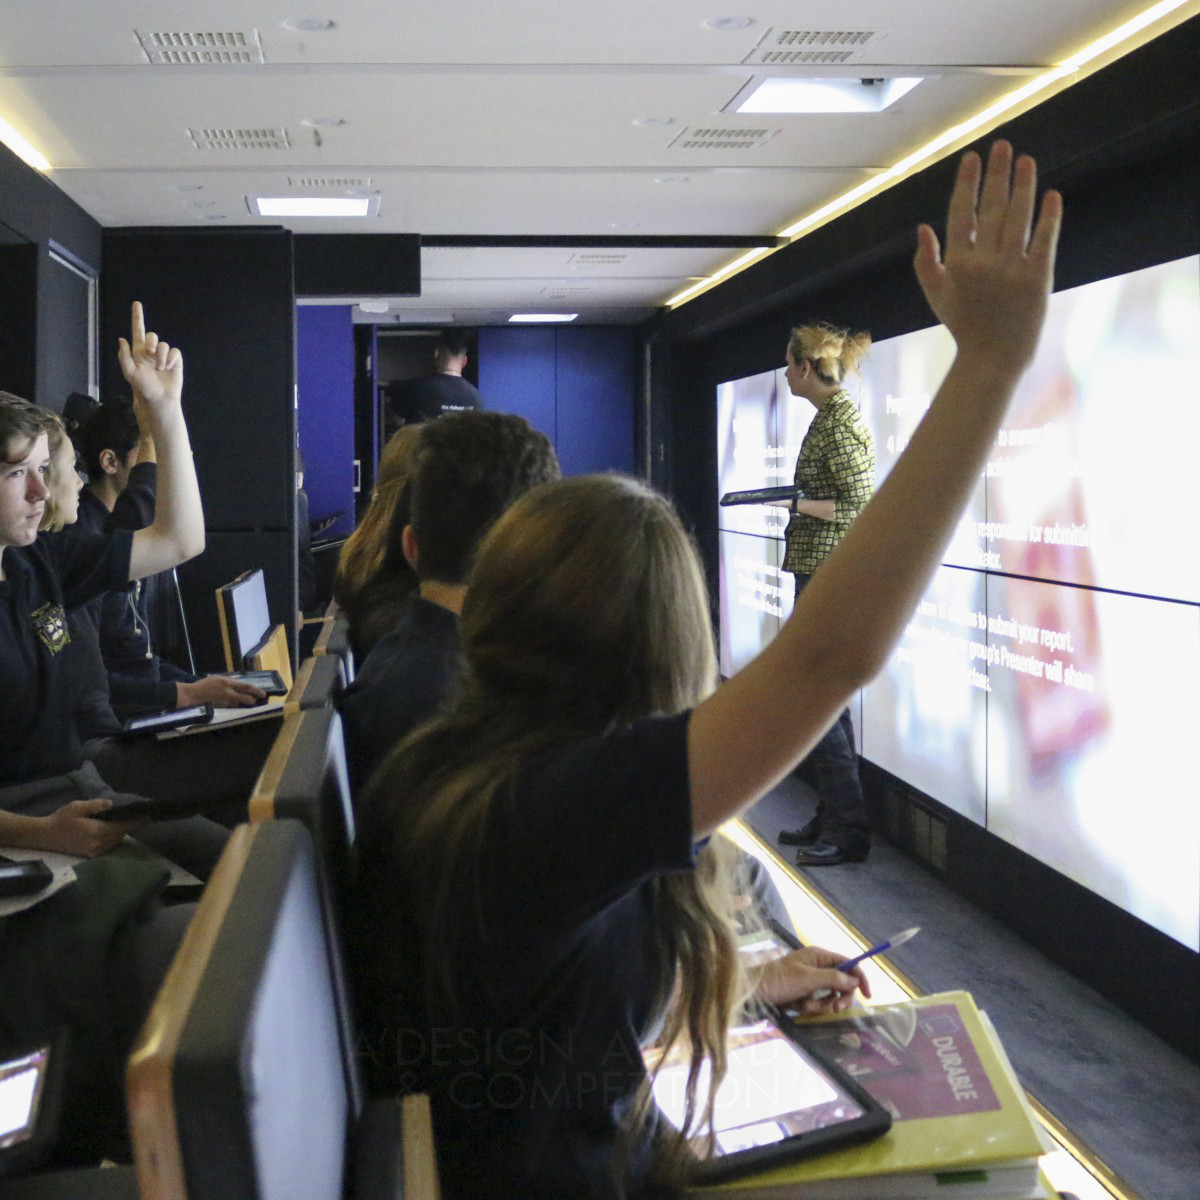 Holodomor Mobile Classroom Immersive Learning Experience by Forge Media + Design